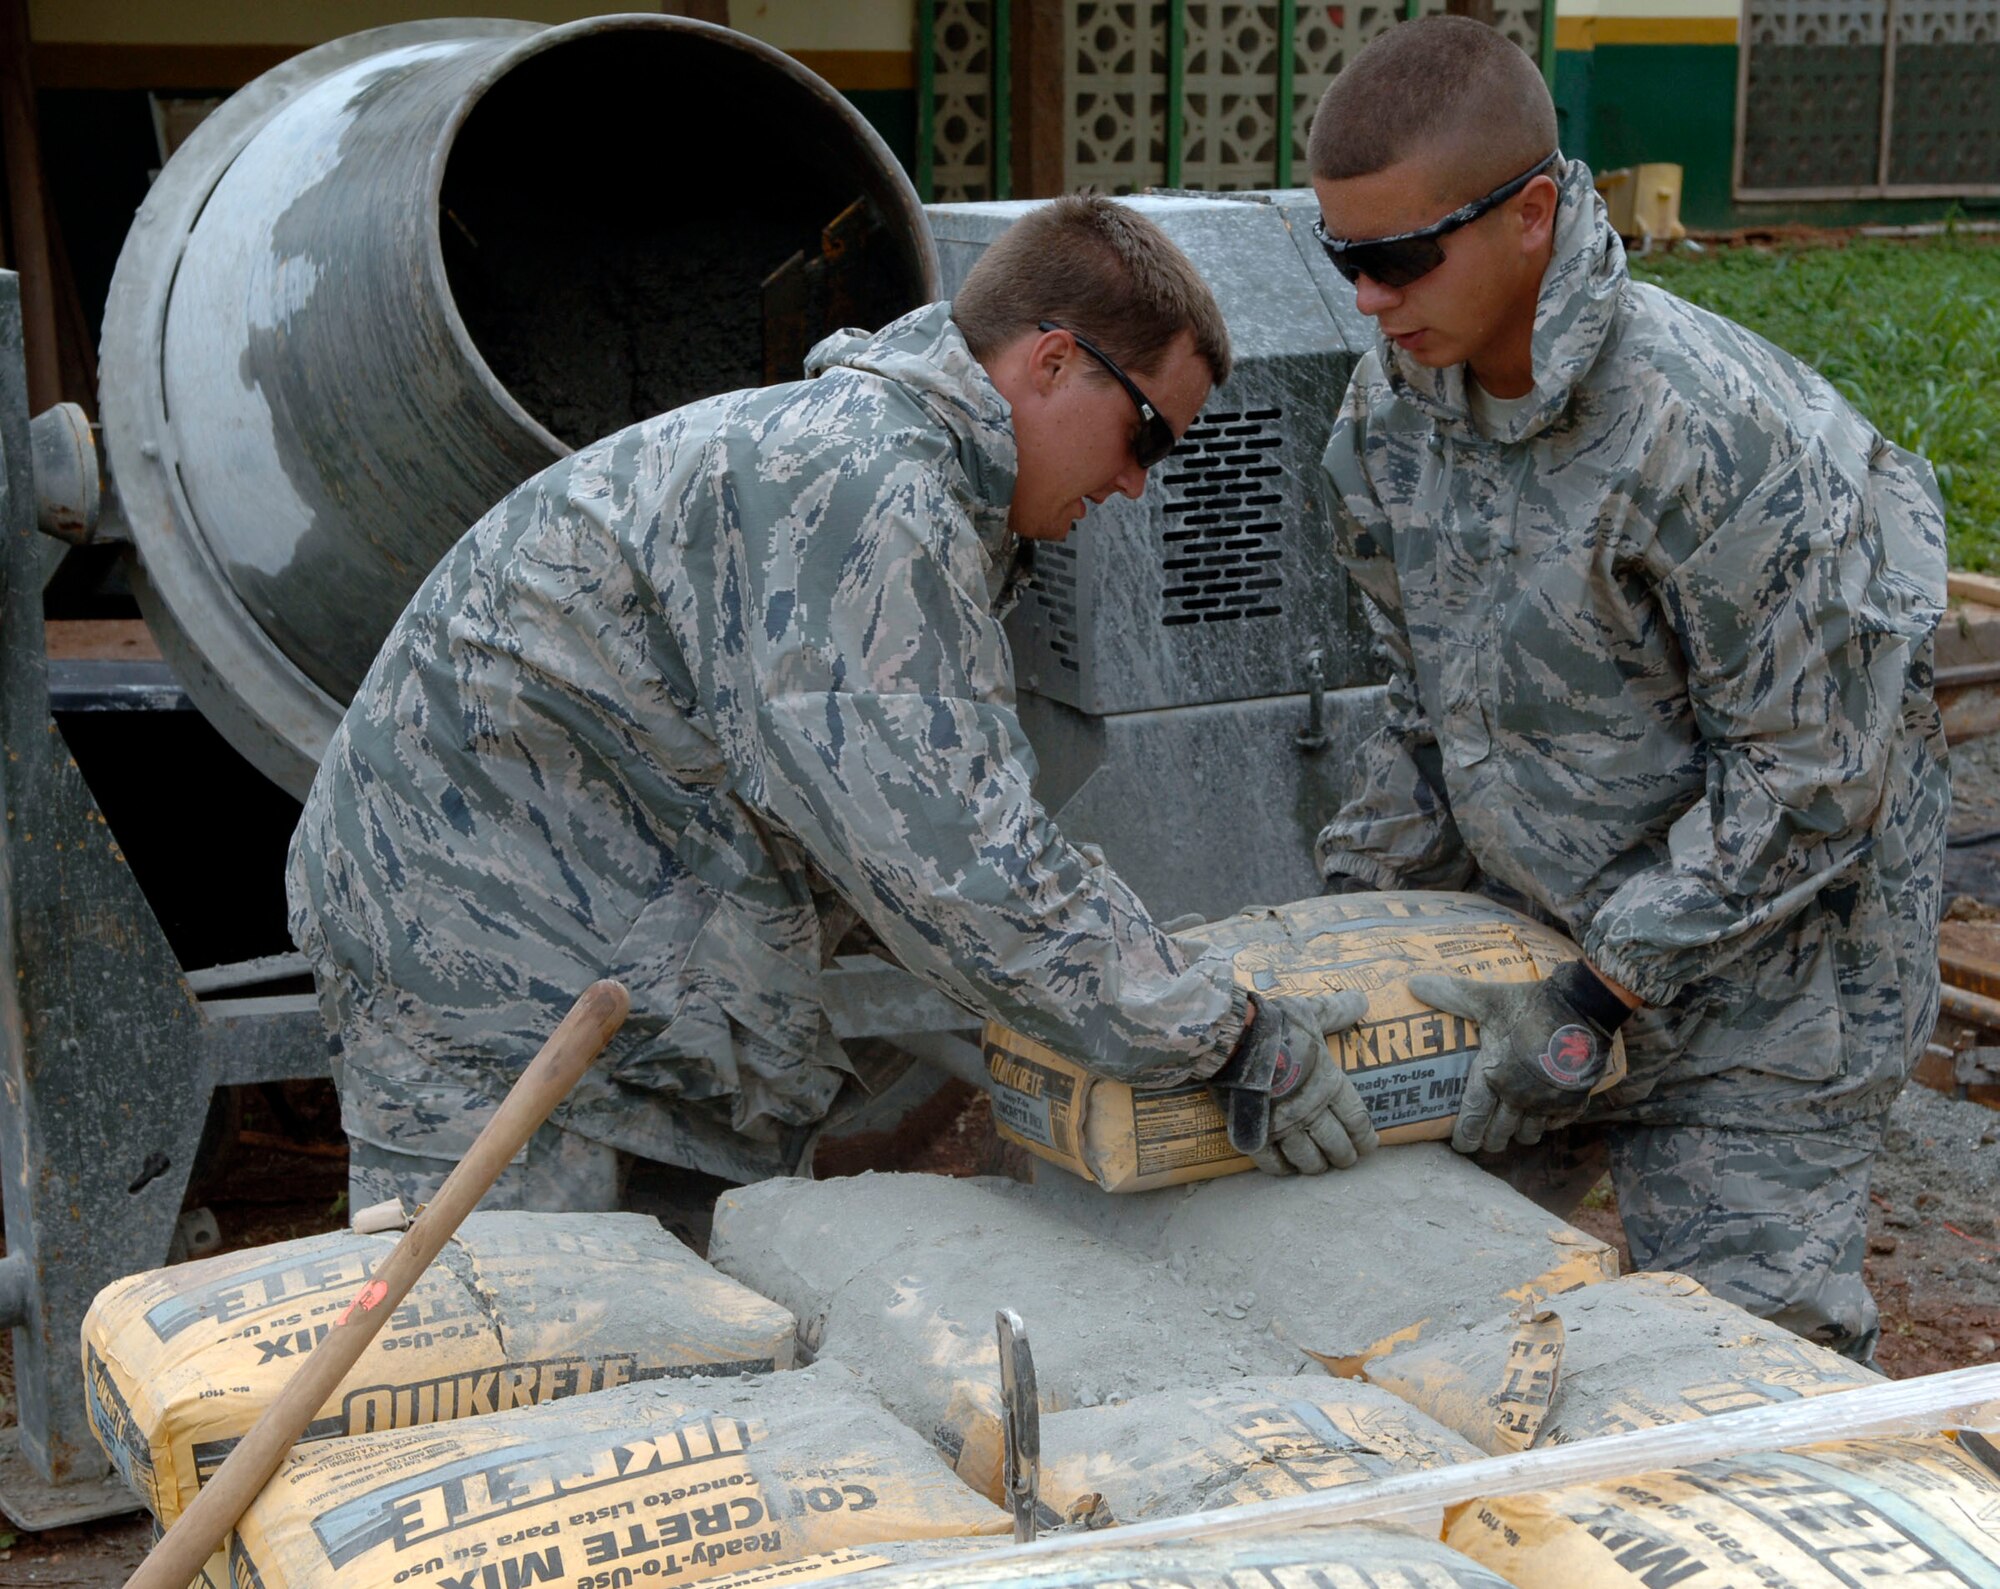 Airman 1st Class Sean Melville (left) and Airman 1st Class Joseph Evanhoff, 820th Expeditionary RED HORSE Squadron, pour bags of concrete into a mixer at Rio Iglesia Medical Clinic July 2. (U.S. Air Force photo/Tech. Sgt. Eric Petosky)